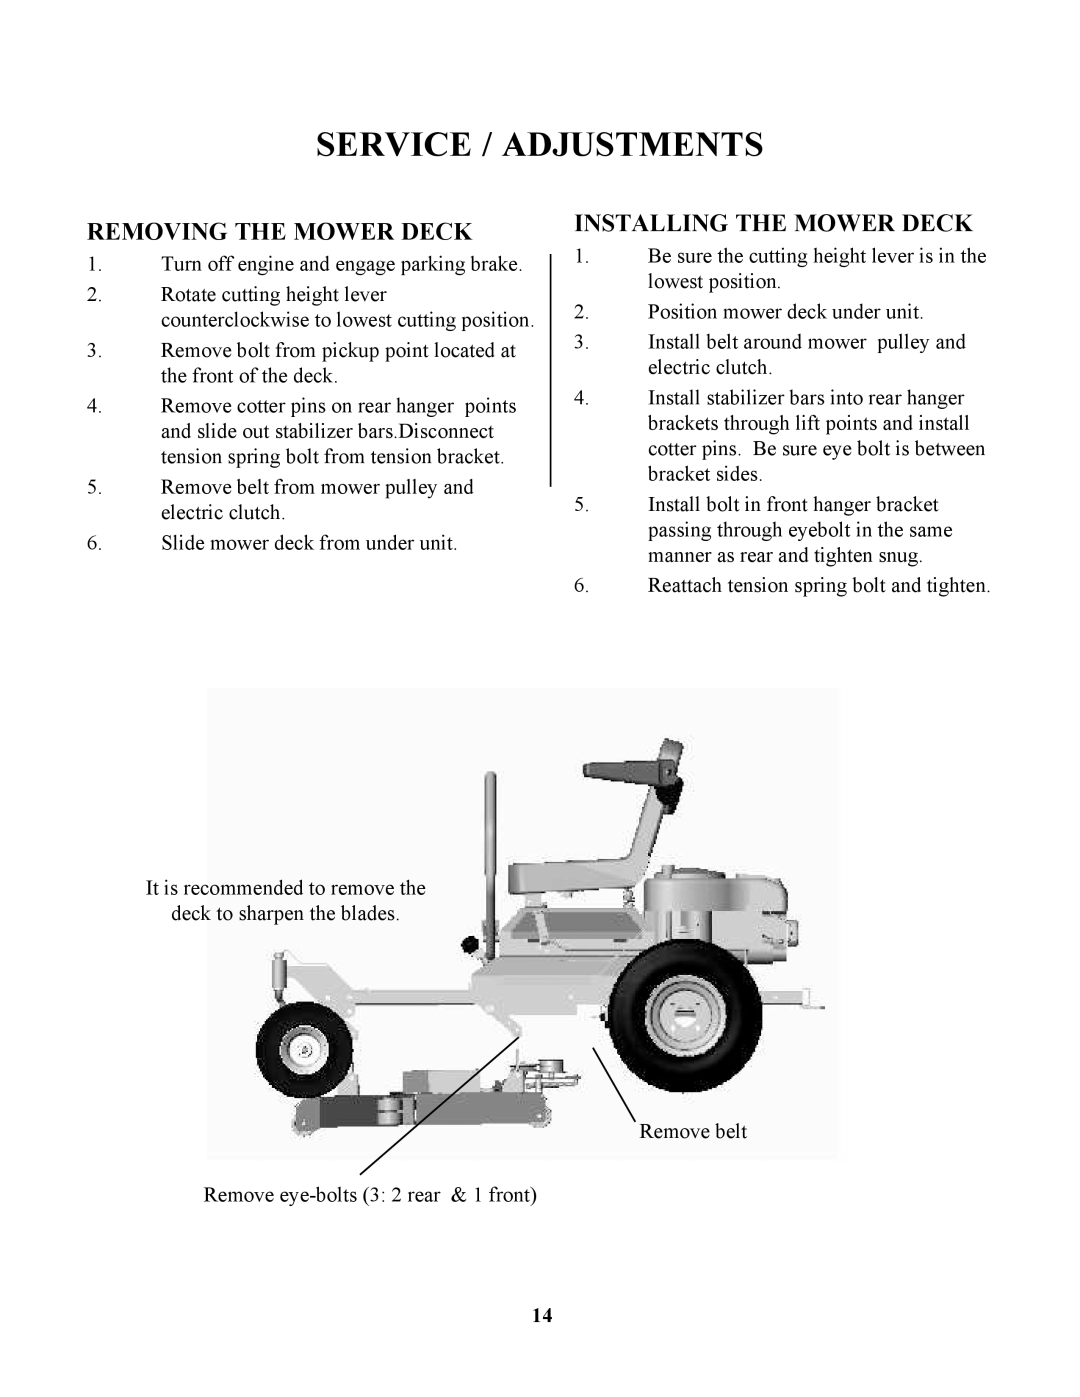 Swisher ZT17542B, ZT13536, ZT20050 owner manual Removing The Mower Deck, Installing The Mower Deck, Service / Adjustments 